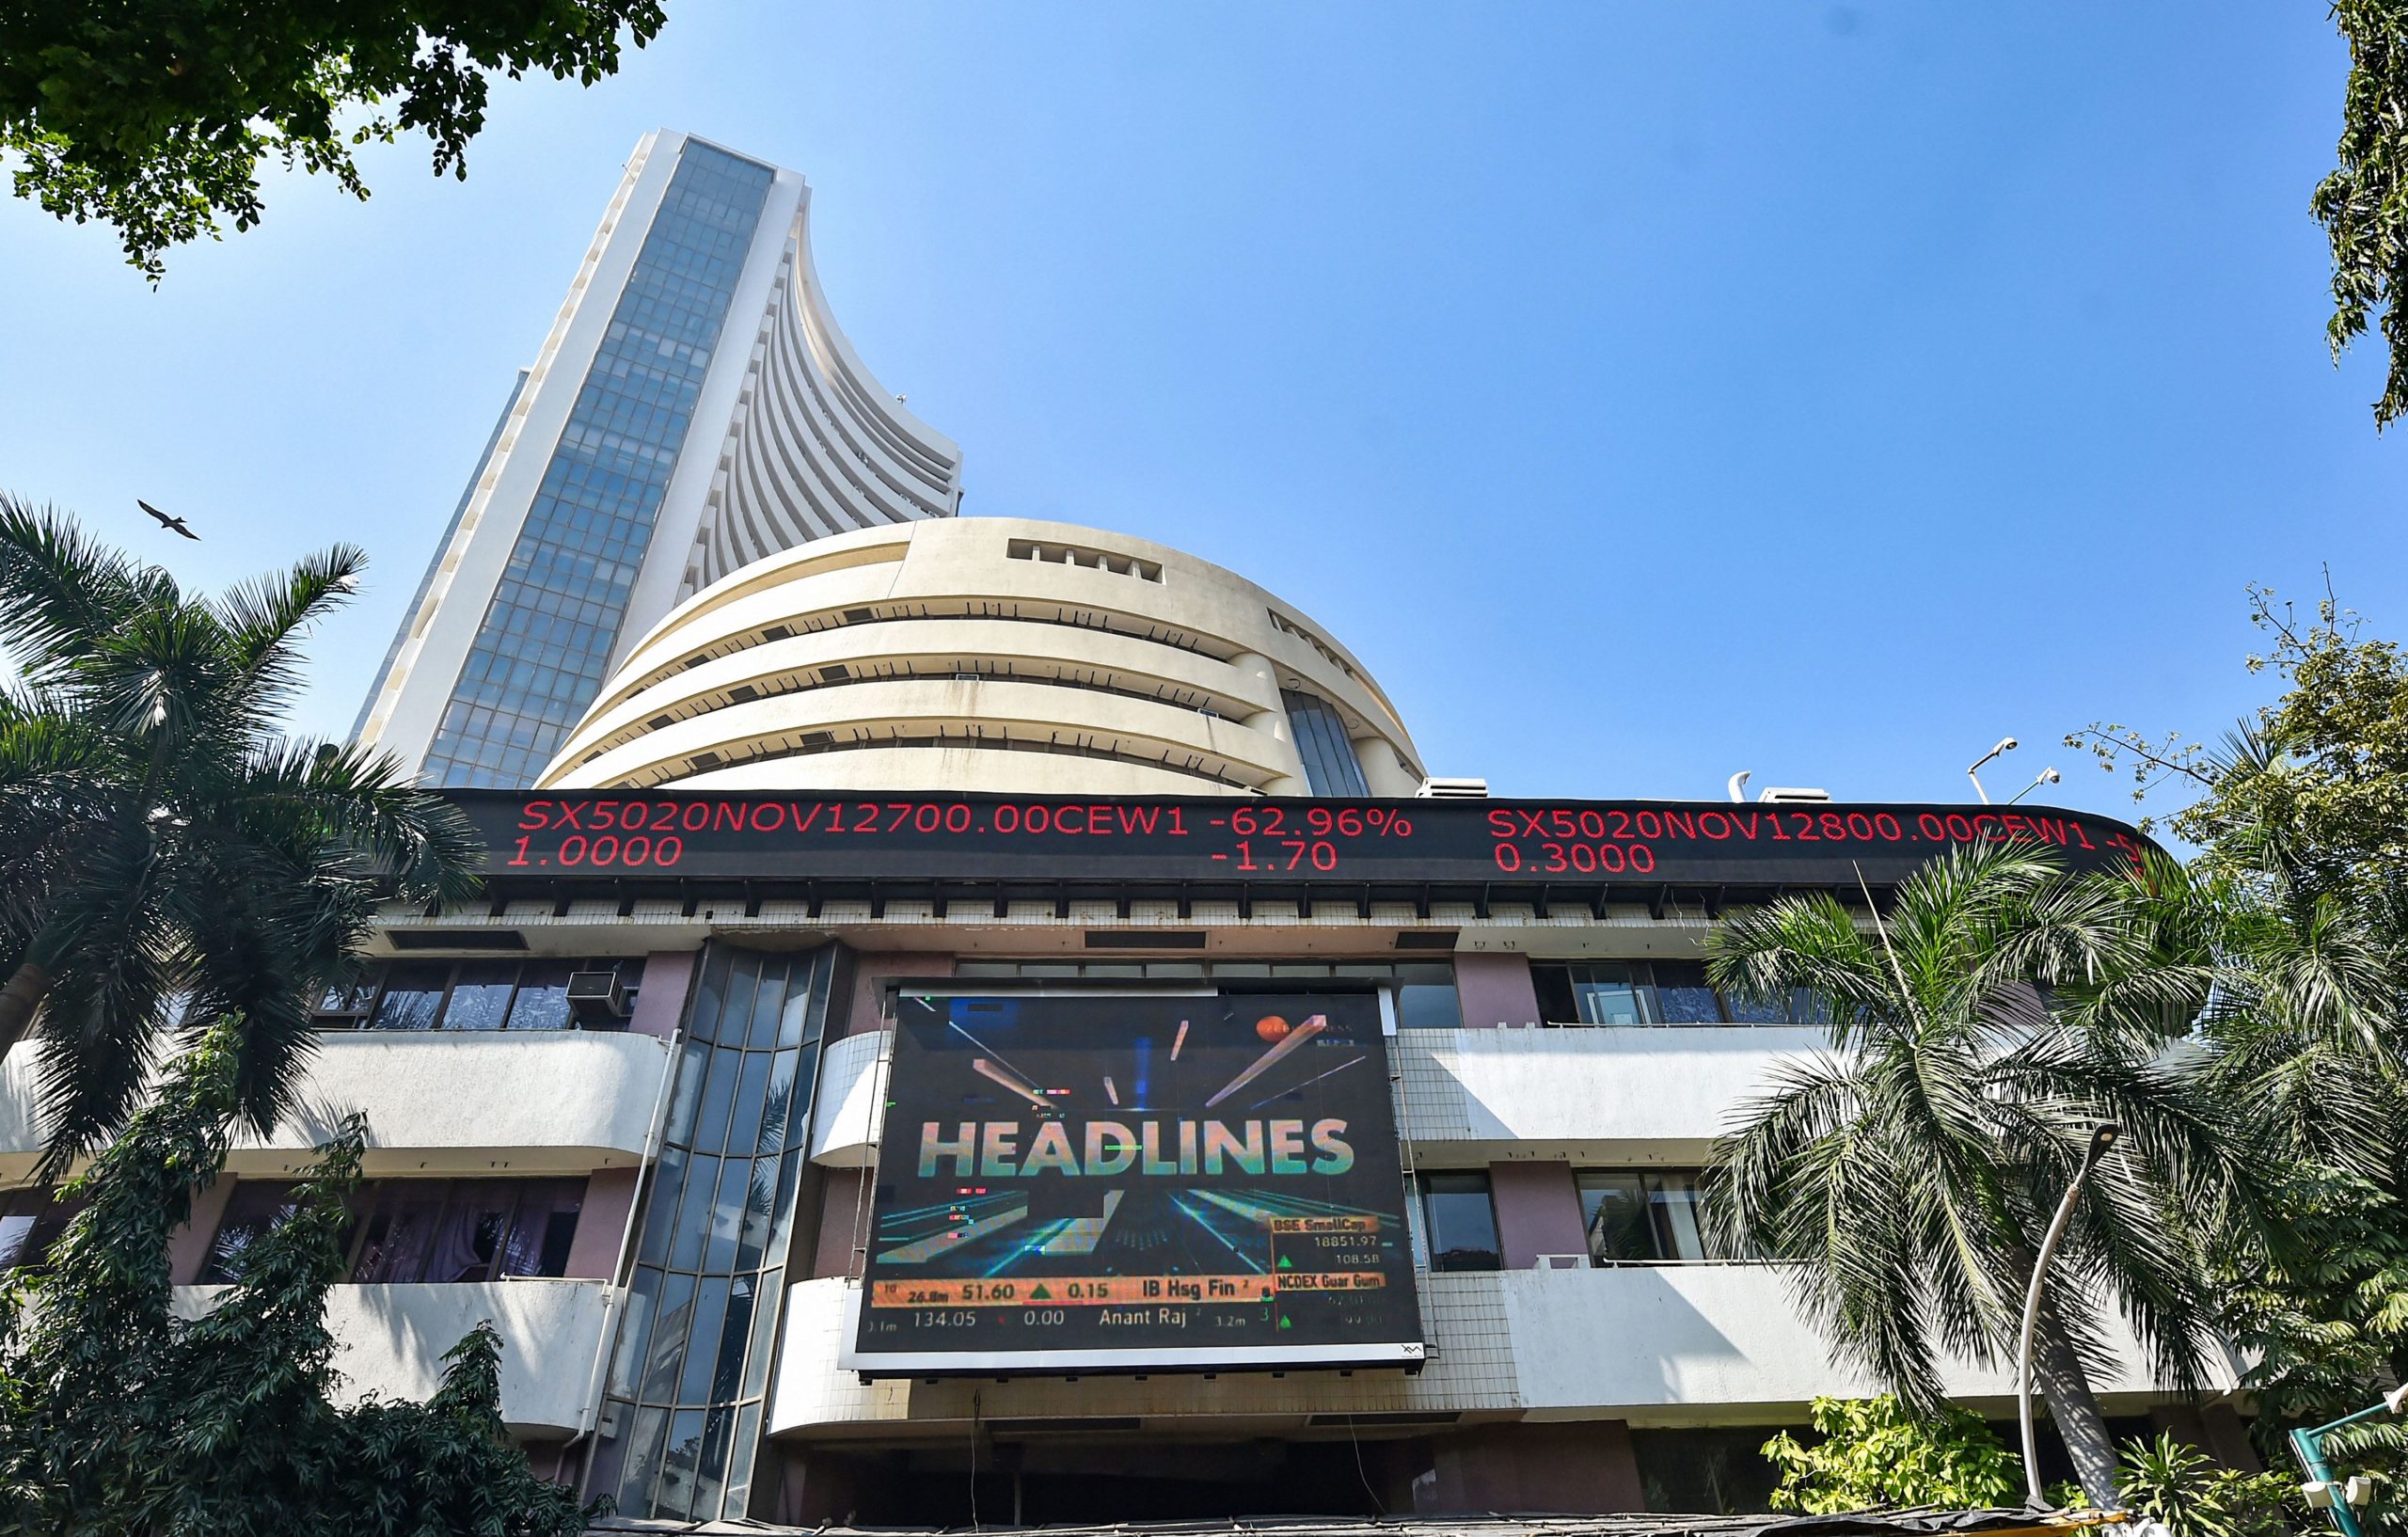 Trending Stocks: Spicejet, Tata Power, Adani Ent, and others in news today